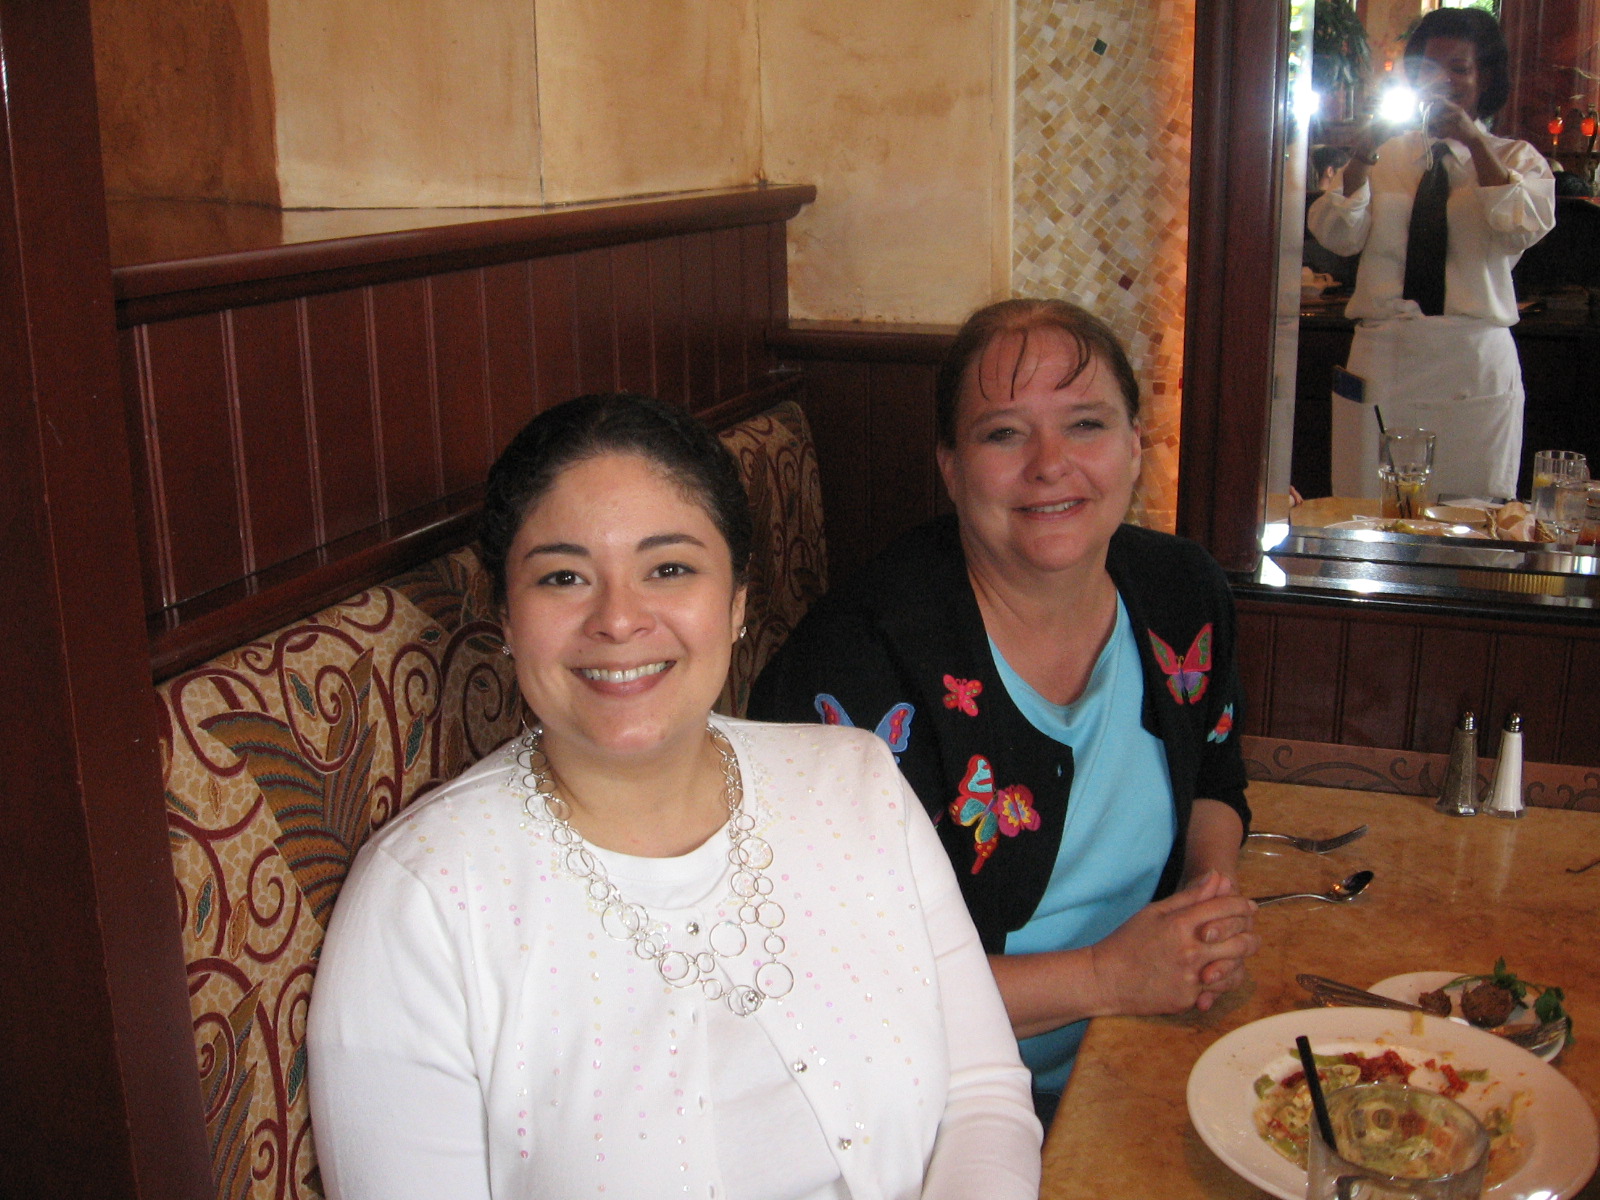 [Lunch+at+the++CheesecakeFactory_042708.jpg]